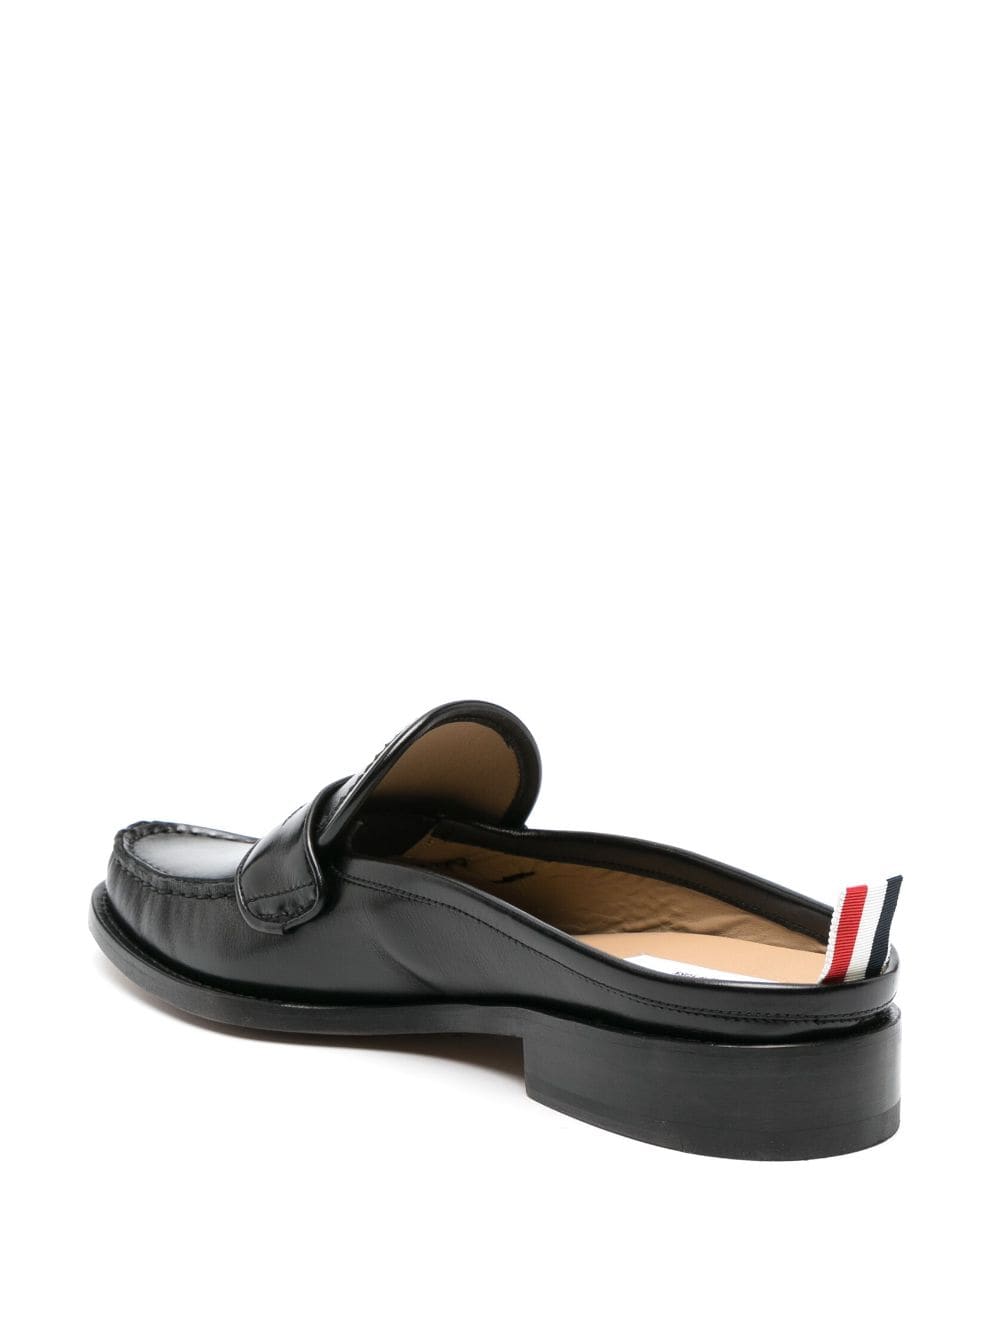 Formal Flat Shoes